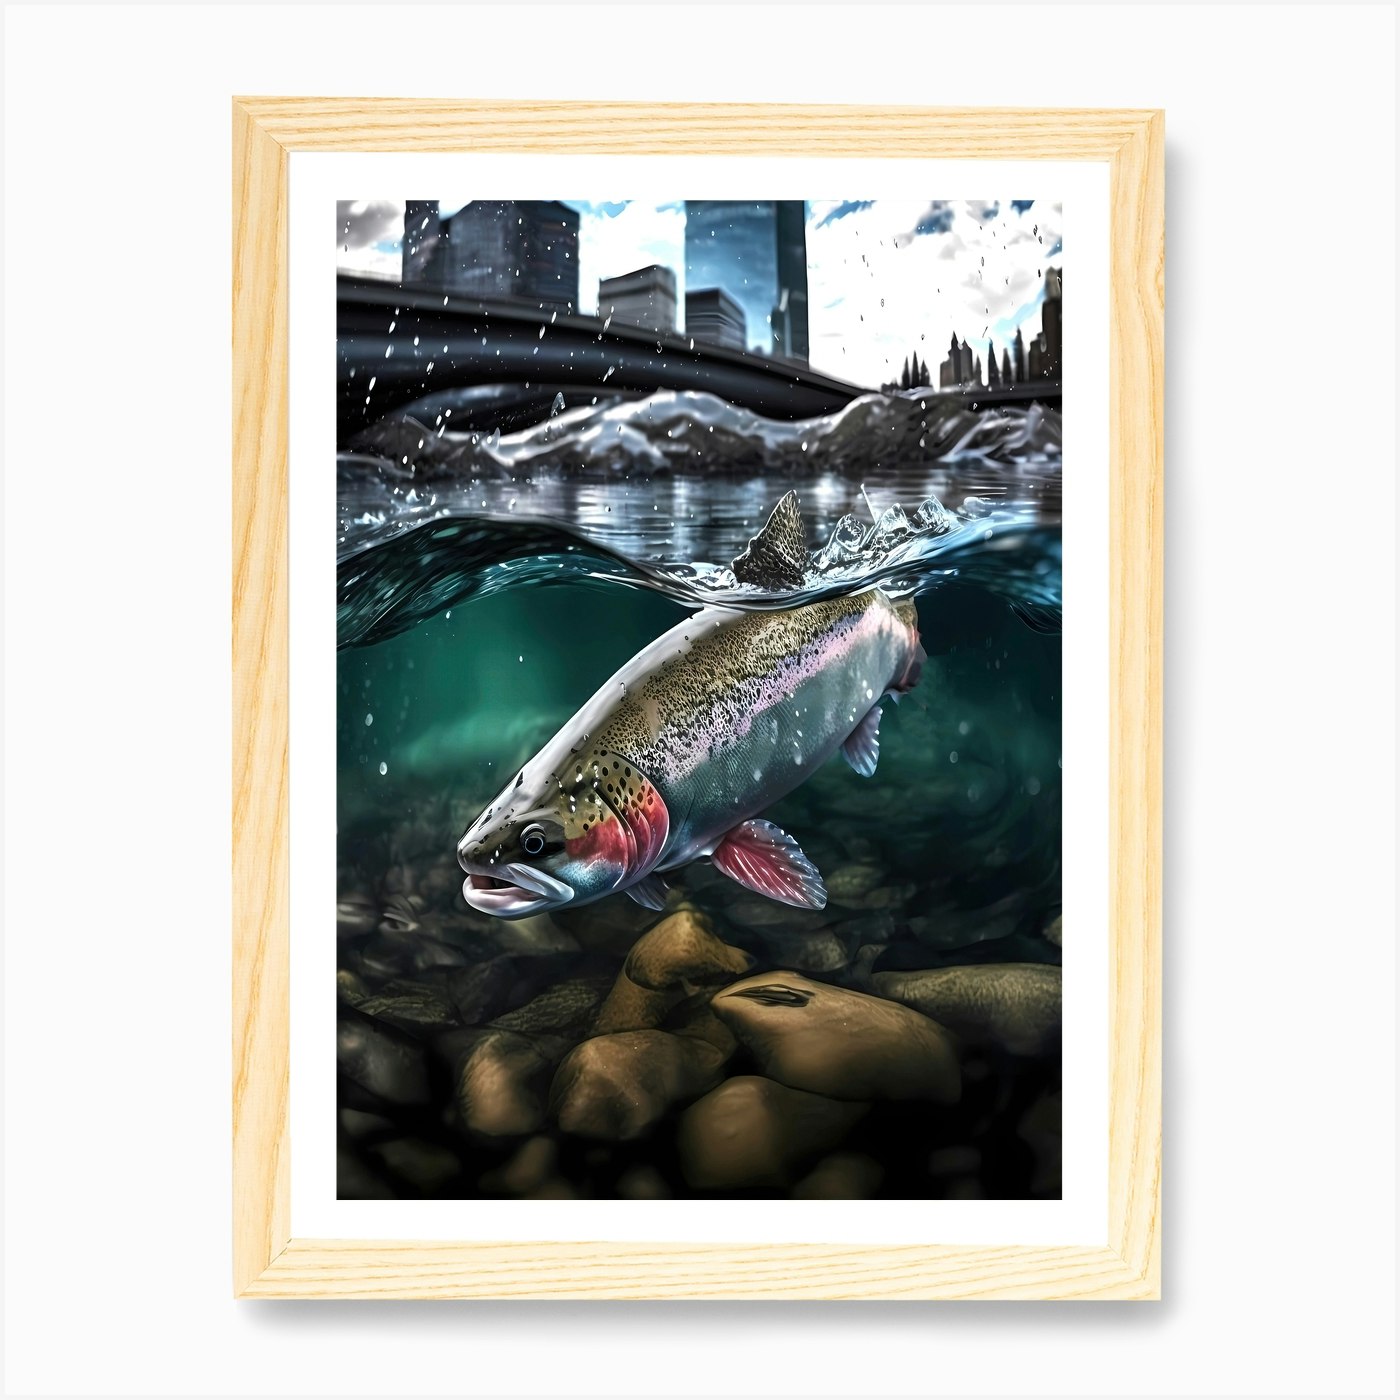 Calgary Cityscape And Trout Cresting Water - Rainbow Trout Art Print